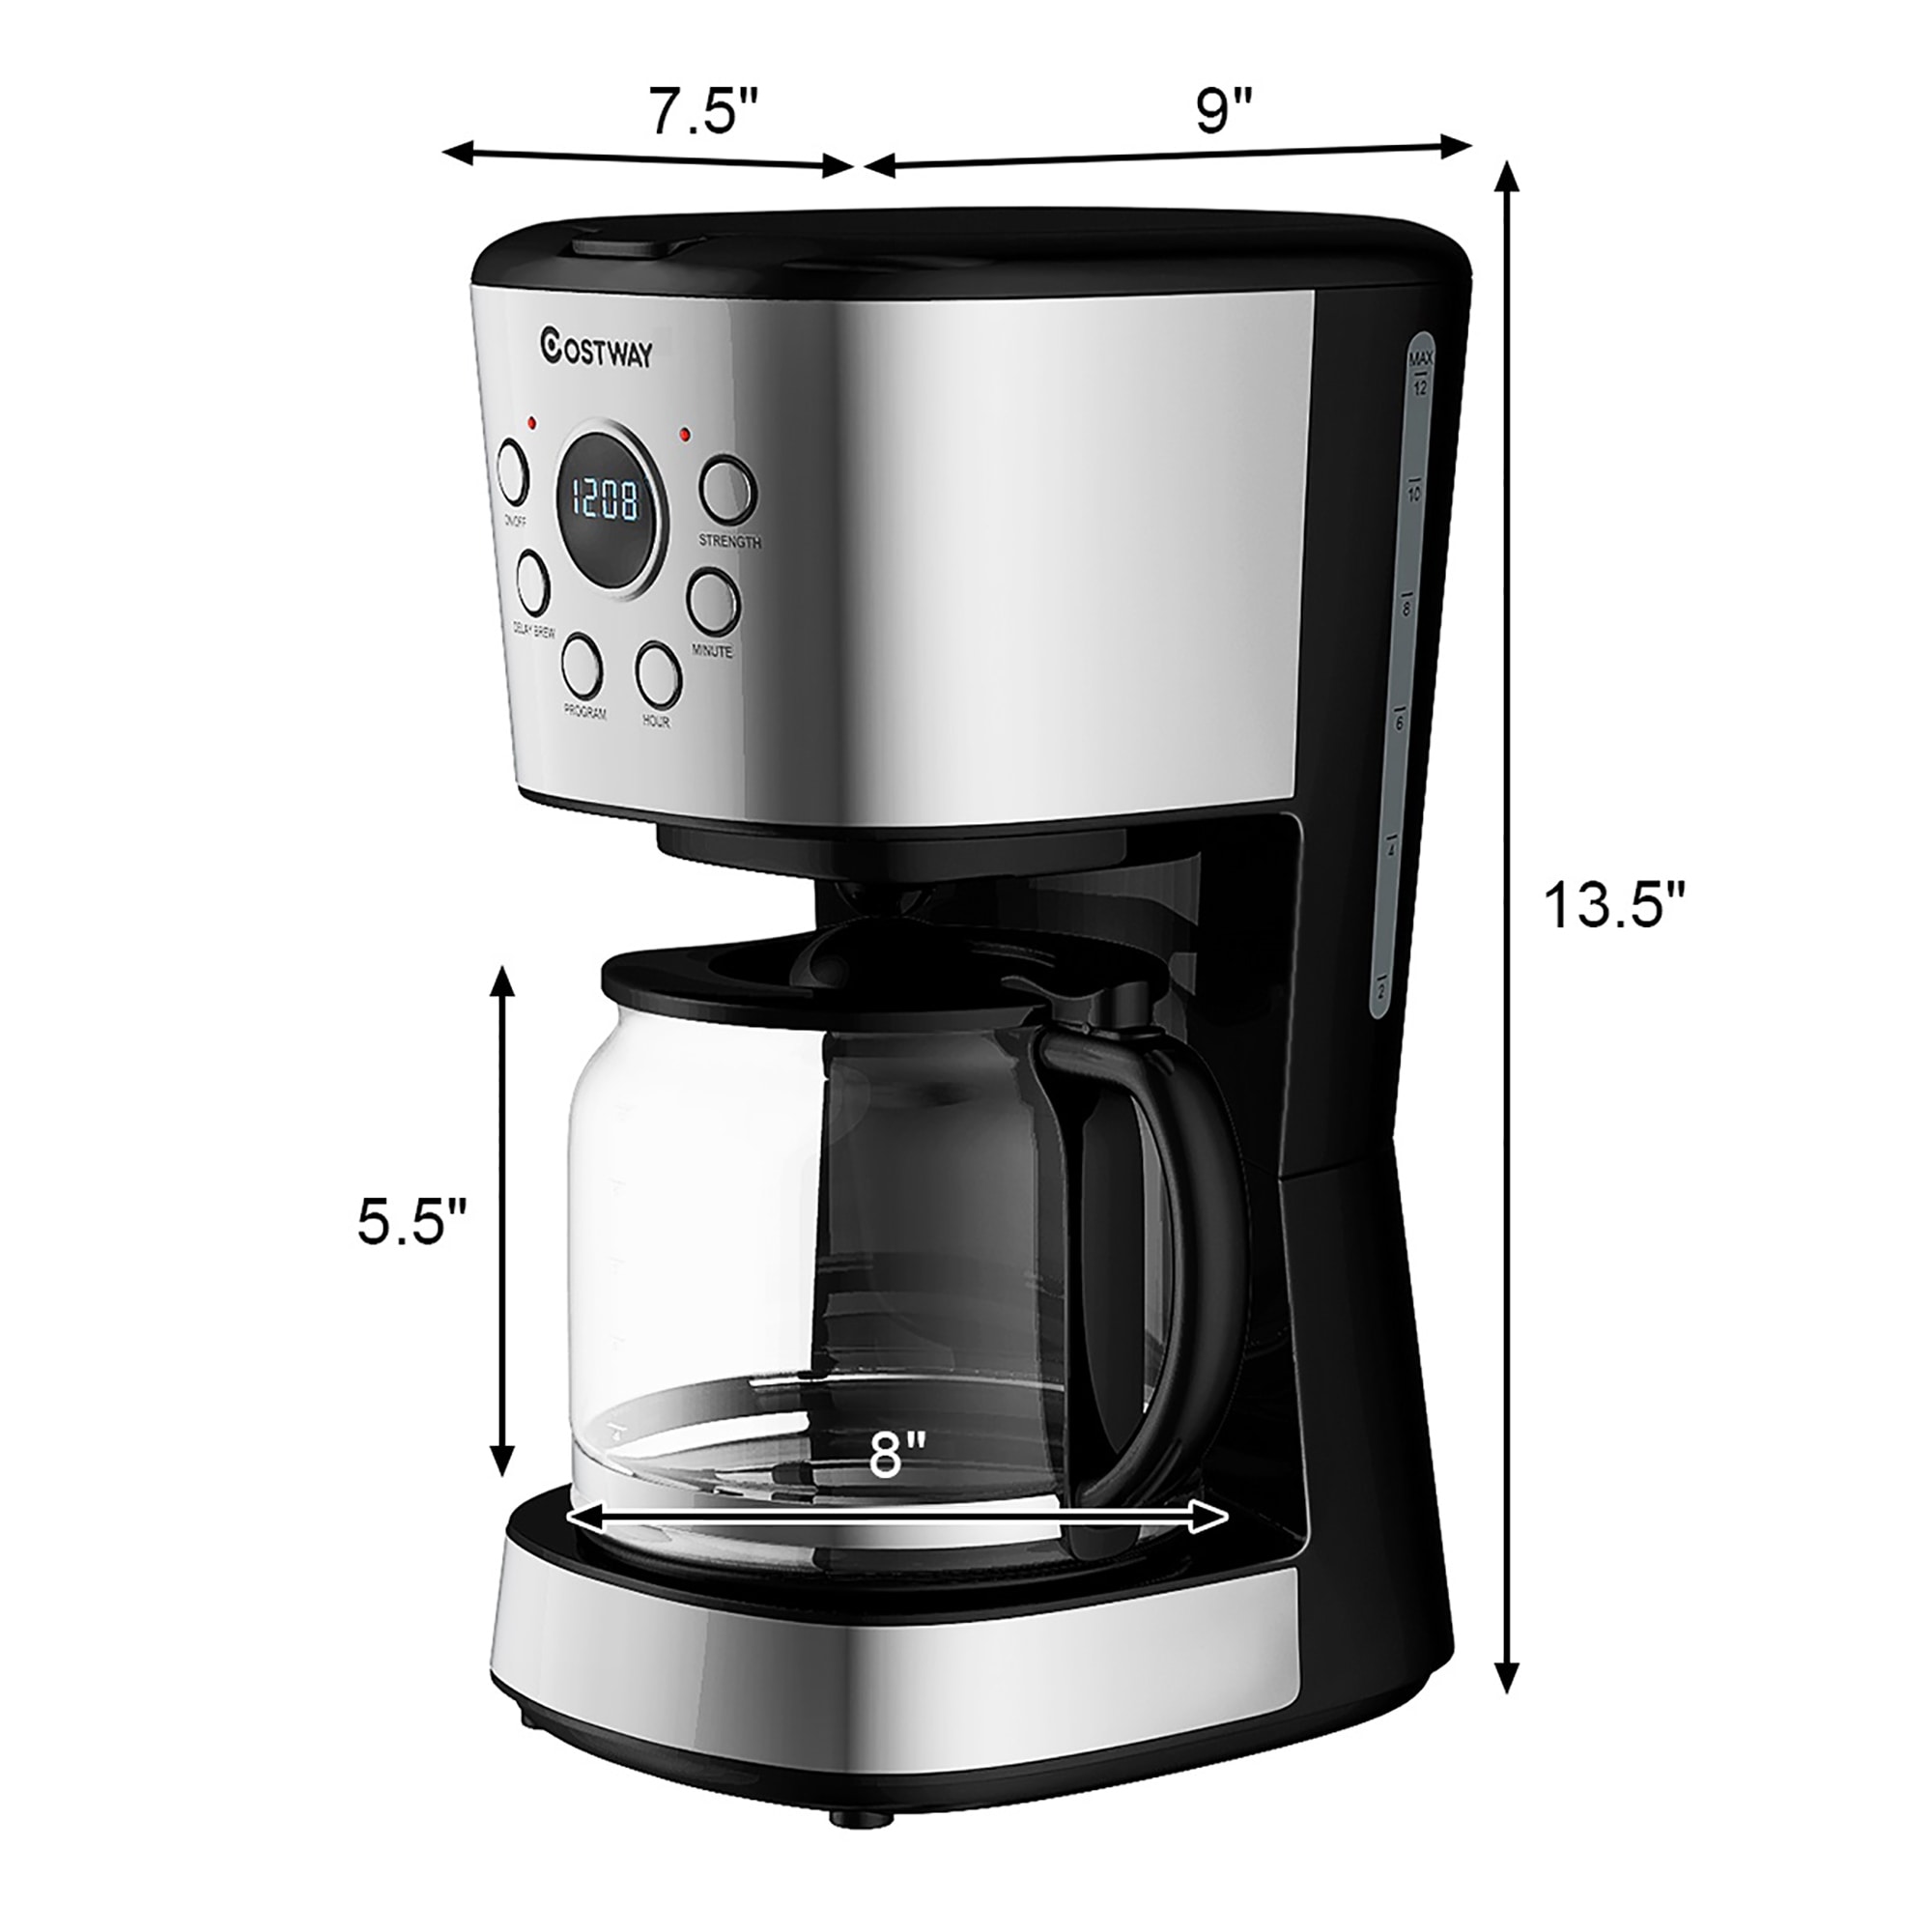 https://ak1.ostkcdn.com/images/products/is/images/direct/94bb1059eb82f41de05ab70198e5c299a22b87b6/Costway-12-Cup-Programmable-Coffee-Maker-Brew-Machine-LCD-Display-w-.jpg